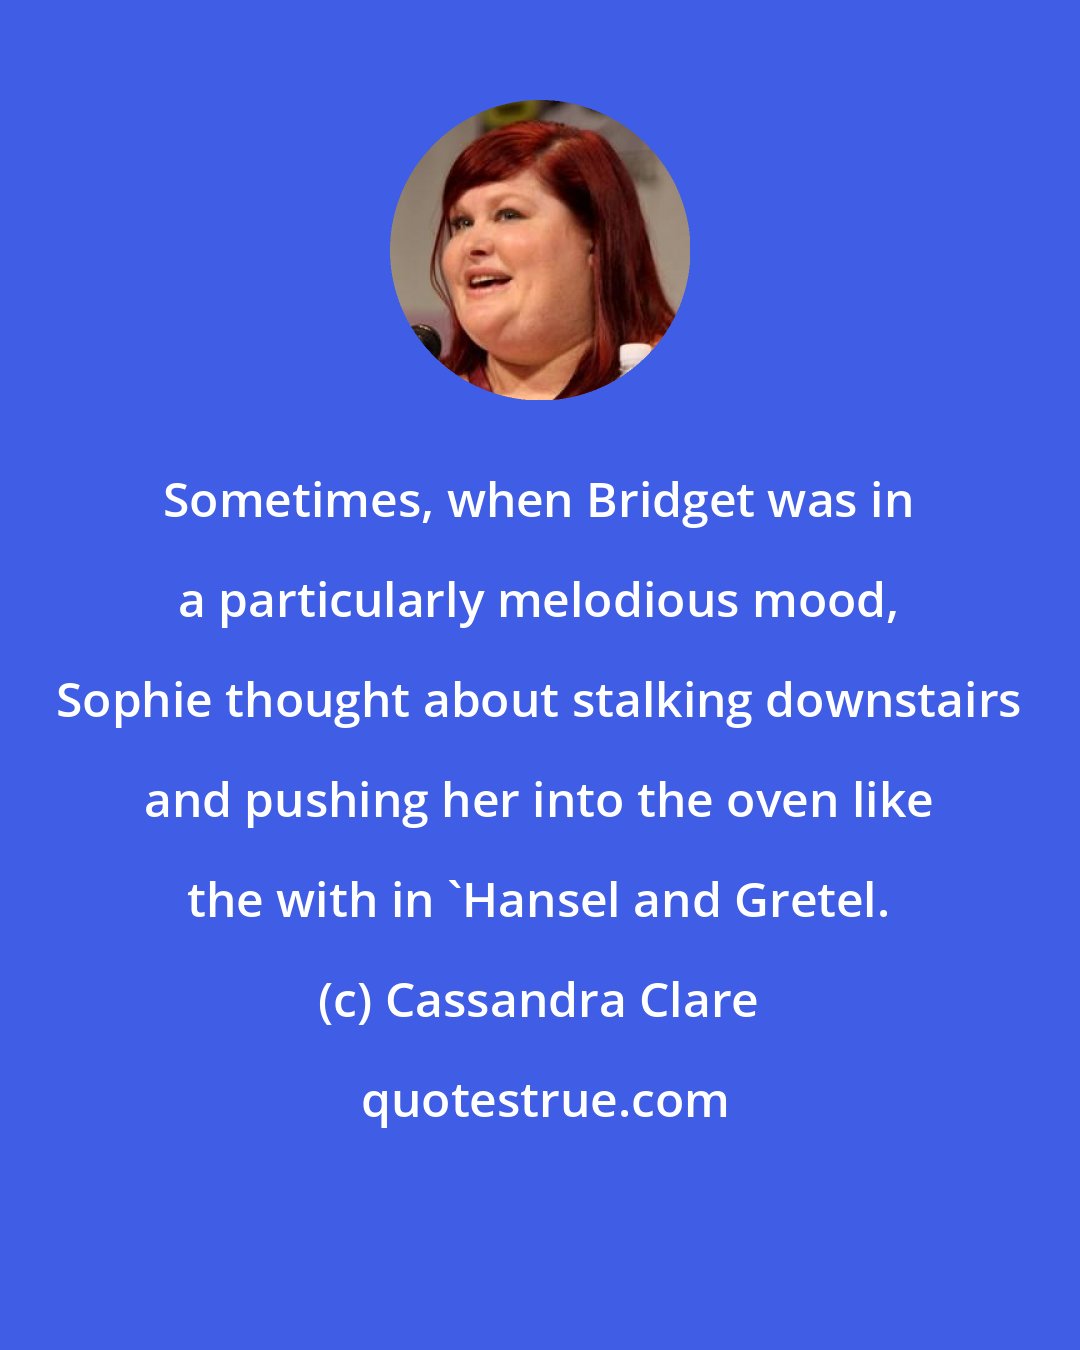 Cassandra Clare: Sometimes, when Bridget was in a particularly melodious mood, Sophie thought about stalking downstairs and pushing her into the oven like the with in 'Hansel and Gretel.